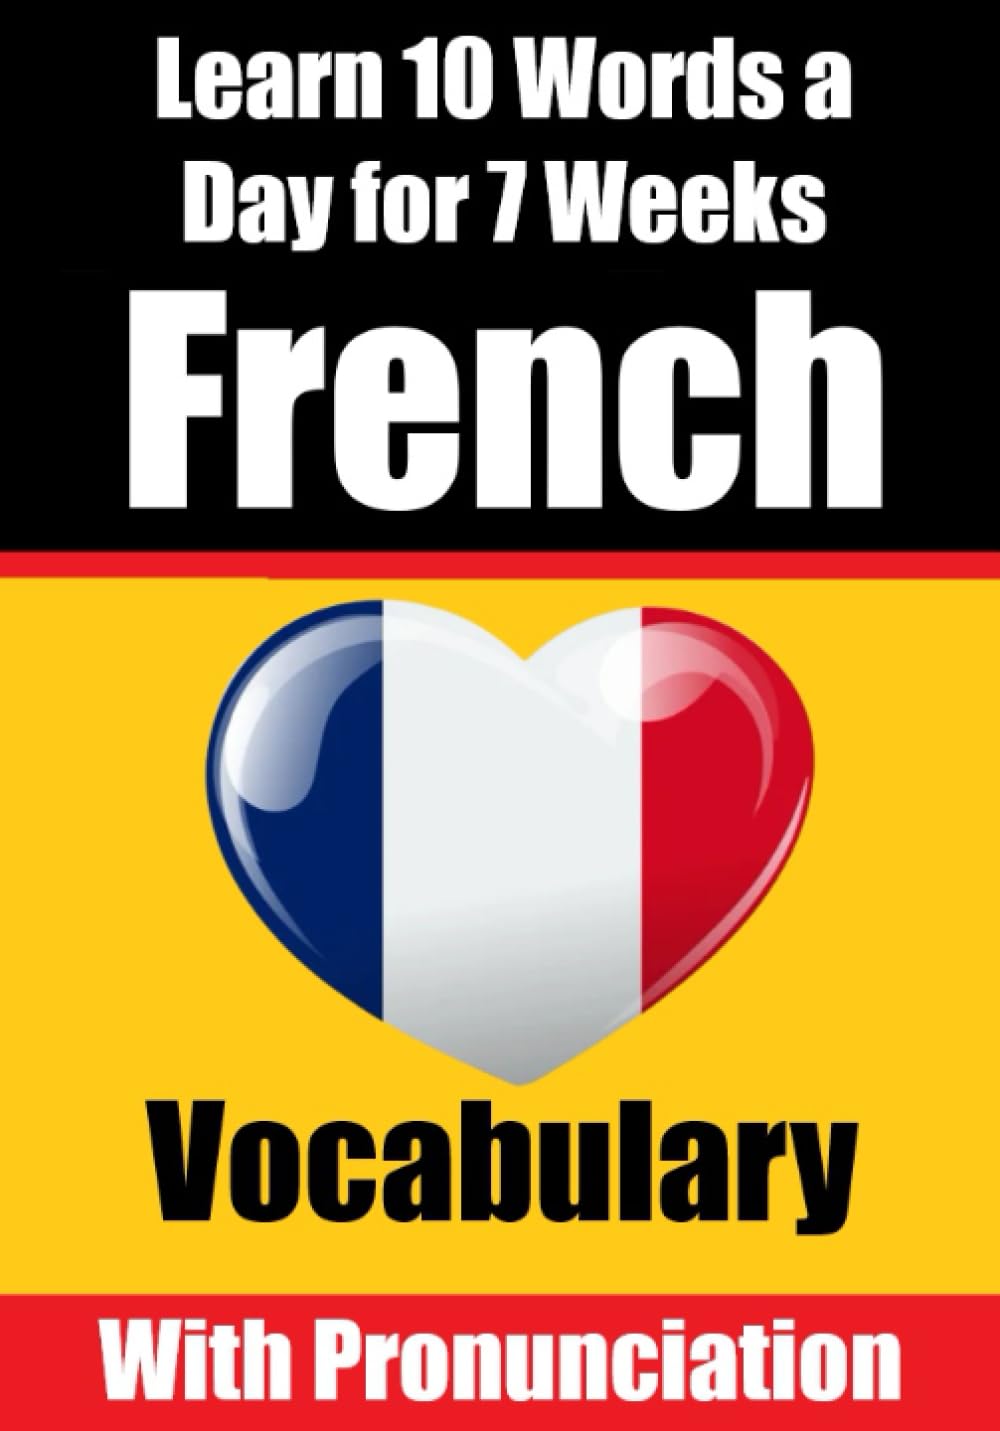 Learn 10 French Words a Day for 7 Weeks